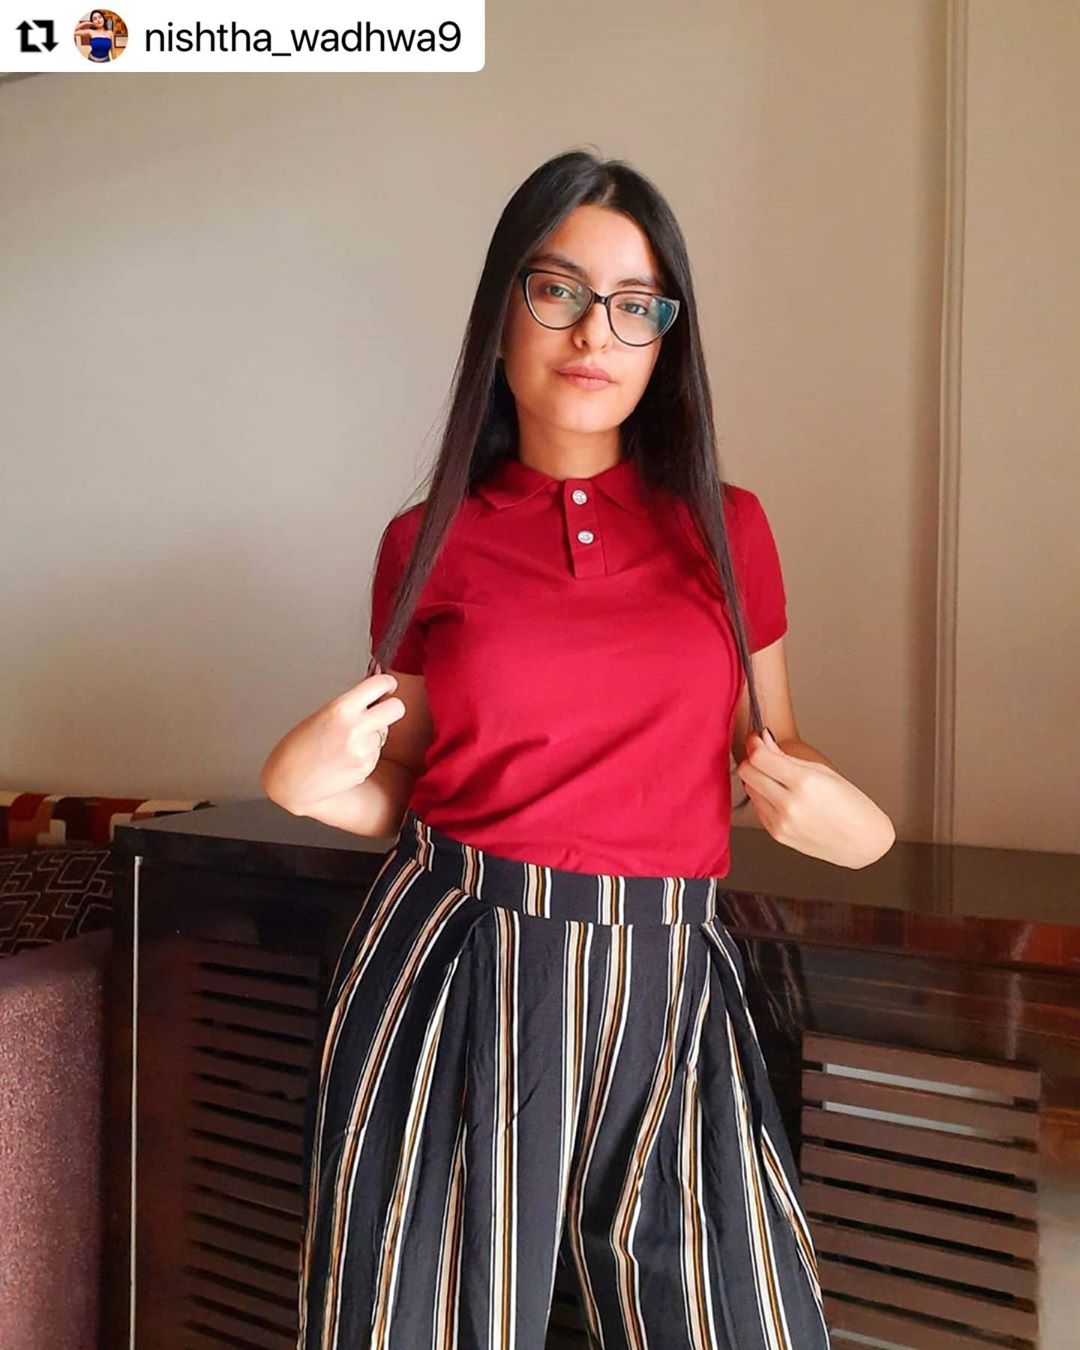 AJIO. com - A super cool look and some solid piece of fashion advice from @nishtha_wadhwa9 – “Invest in good basics and you’ll have endless options to play with,” she says. 
.
.
Shop the season’s best...